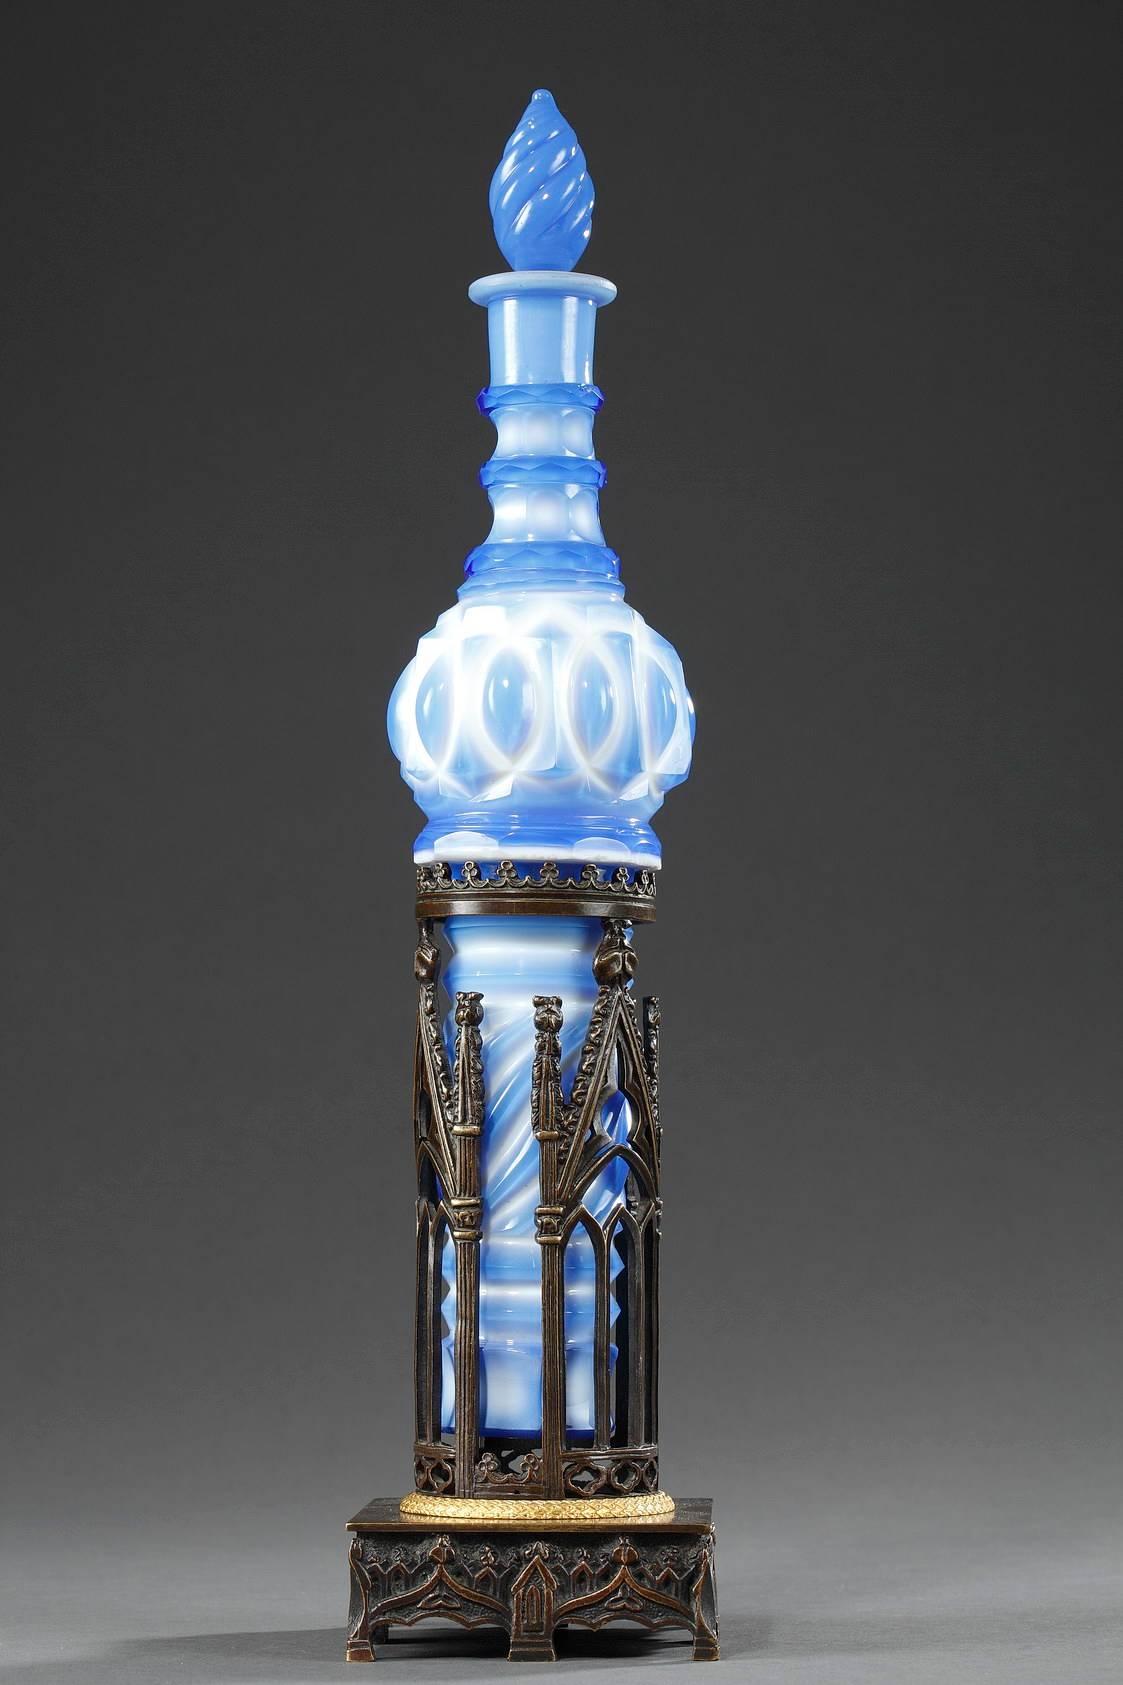 Crystal decanter with blue and white overlay used for serving Carmelite Water, a floral-based liqueur. The decanter, with its spiraling, pointed stopper is embellished with twisting and intertwining patterns. It nestles into a patinated, Neo-Gothic